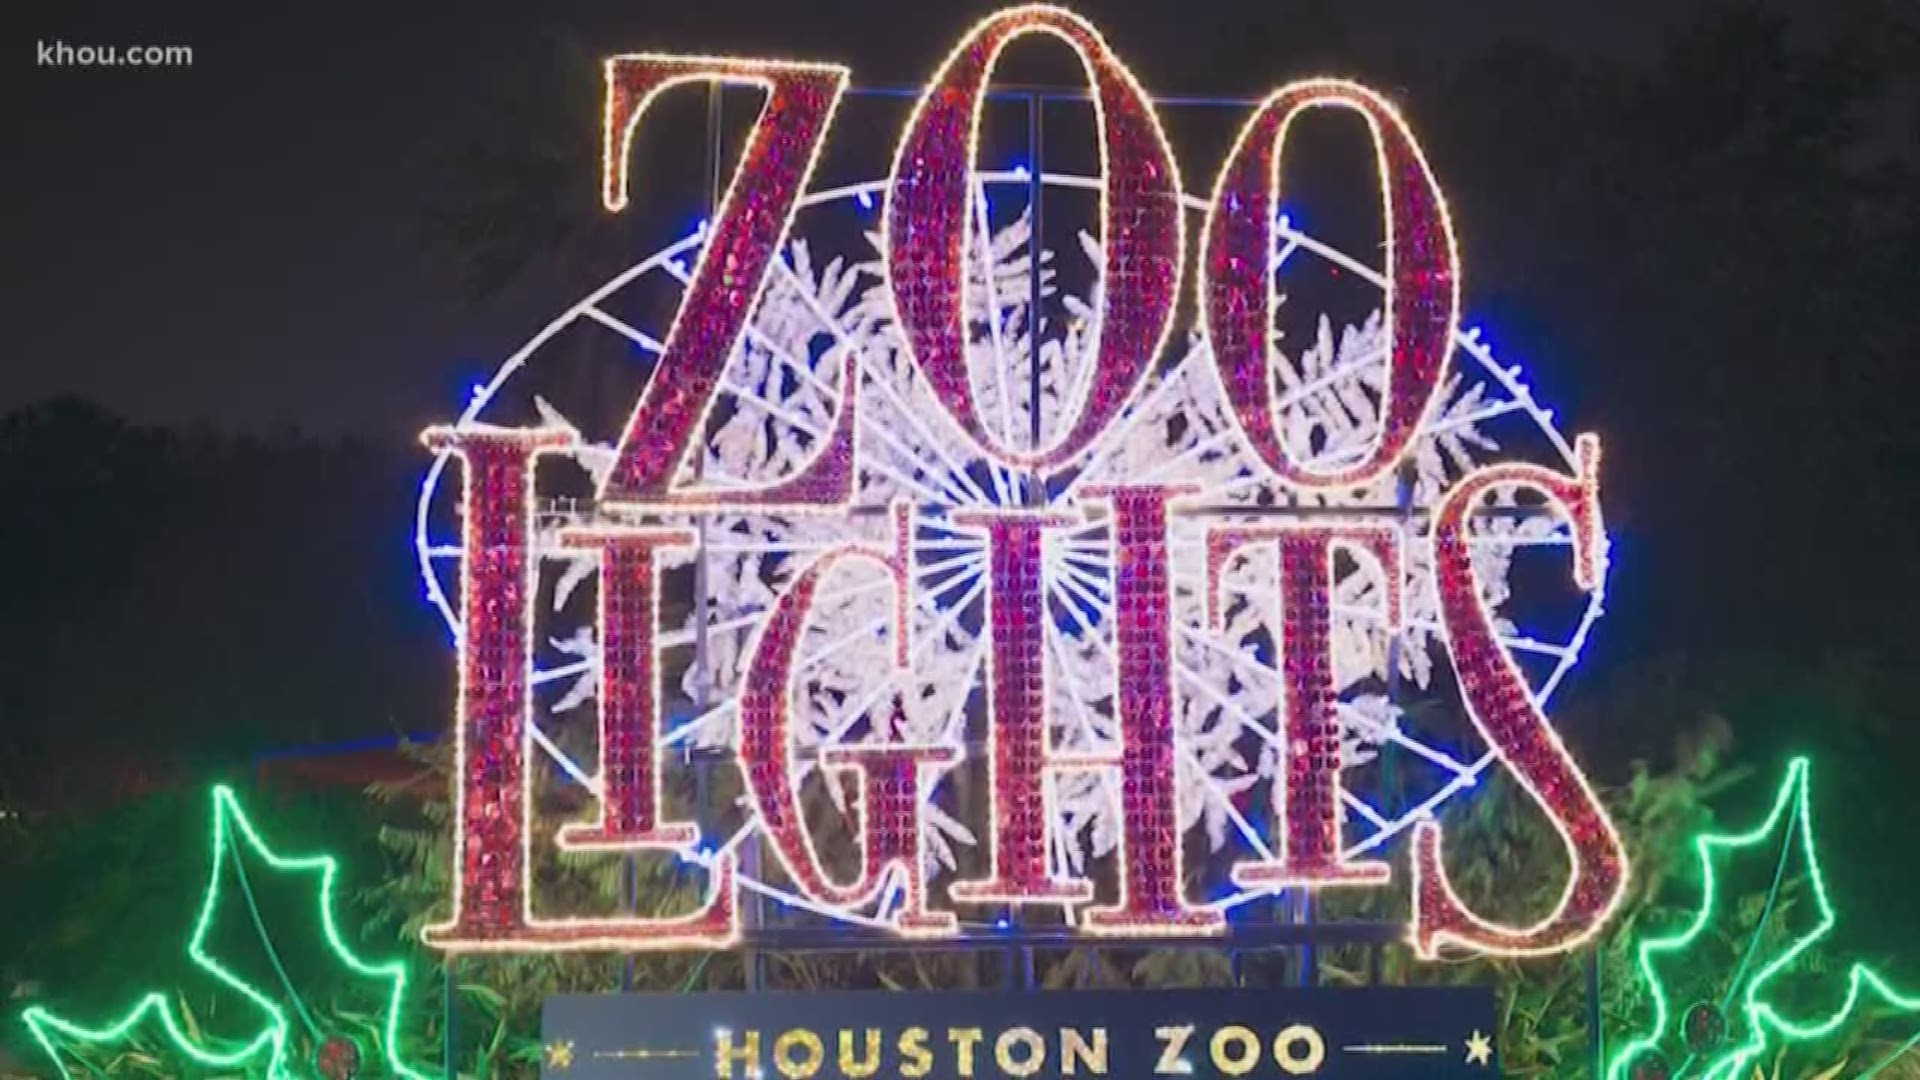 Get ready to step inside a winter wonderland at the Houston Zoo. Their holiday spectacular Zoo Lights is in full swing lighting up the night sky.